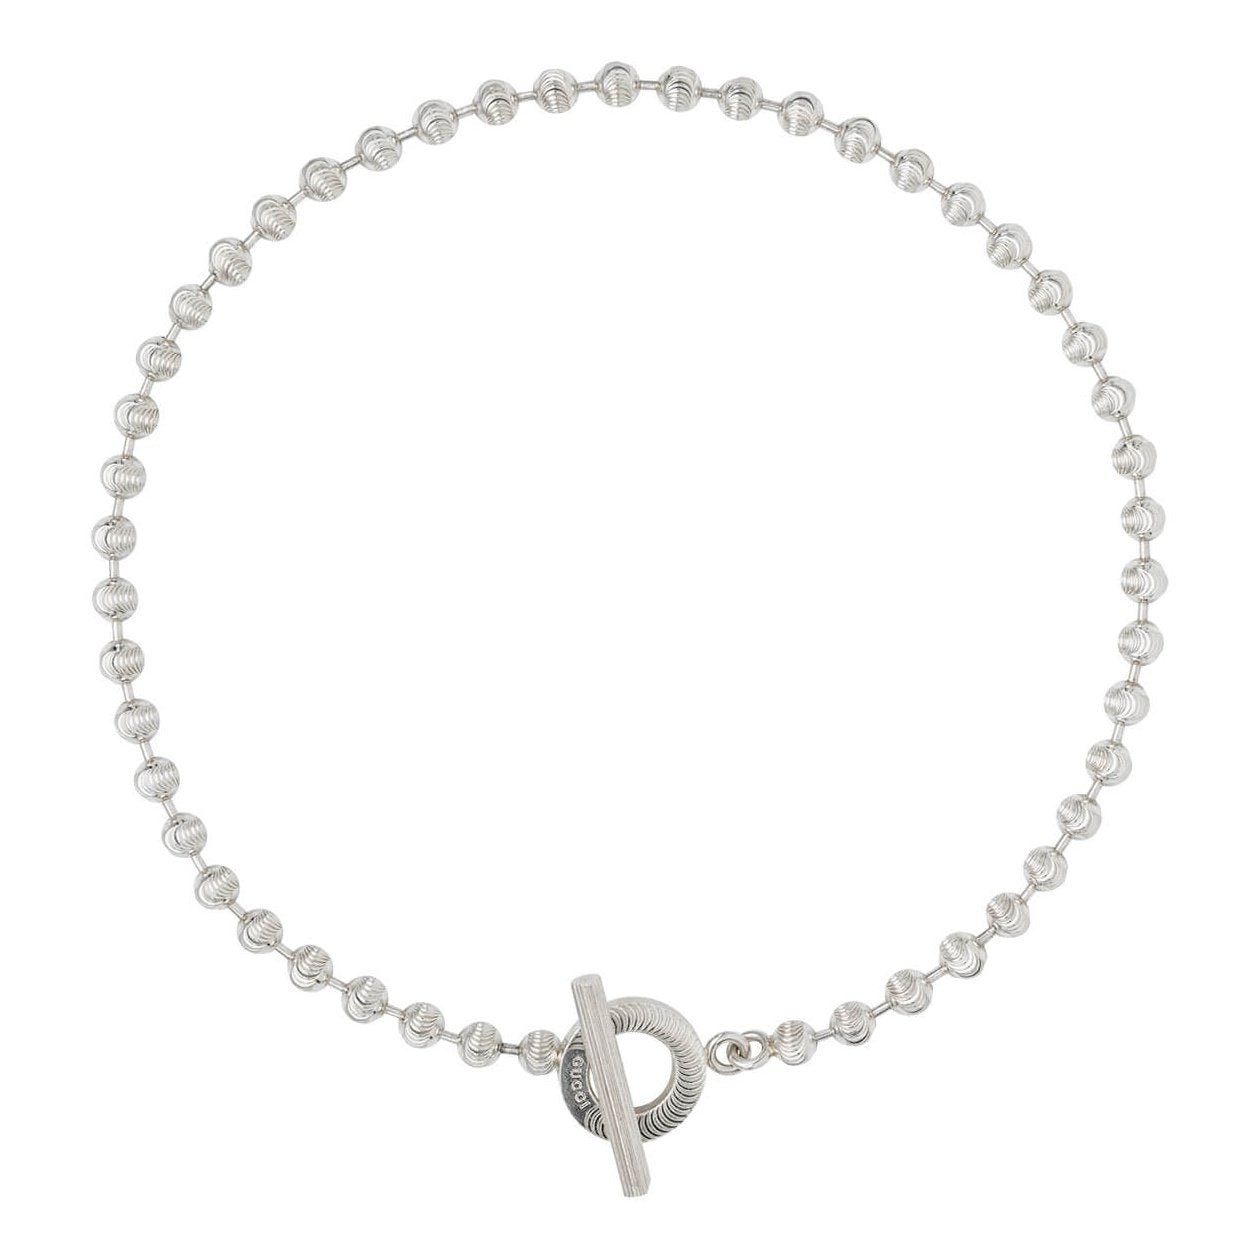 Gucci Boule Choker Necklace In Silver 37Cm YBB602736001 Gucci Jewelry